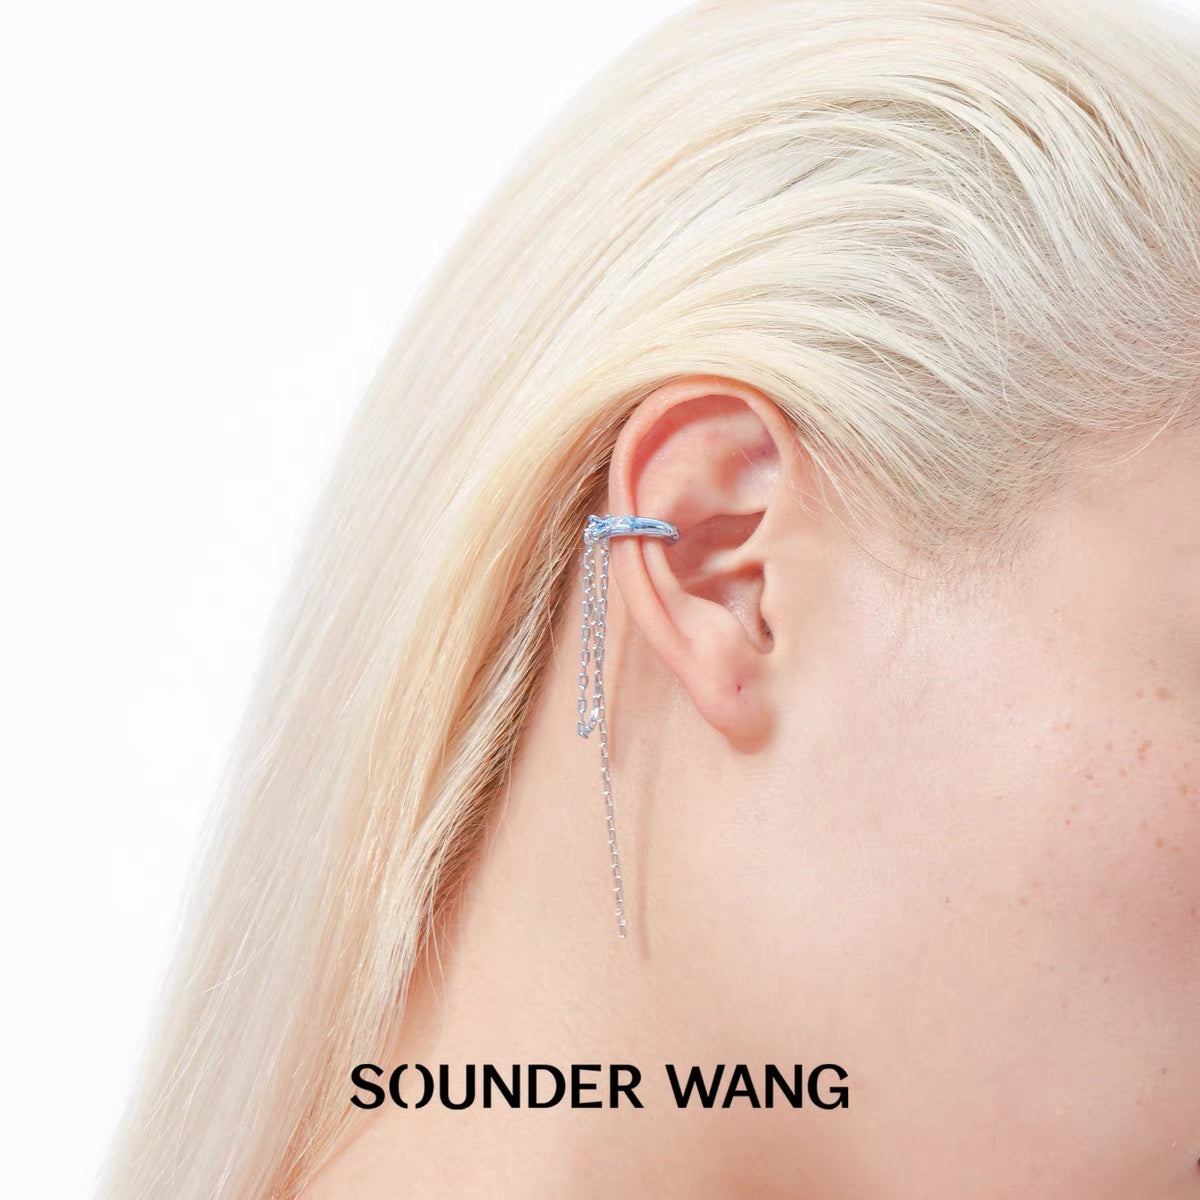 'Sunny Day' Gradient Ear Clip - Sounder Wang - ALSOLIKE